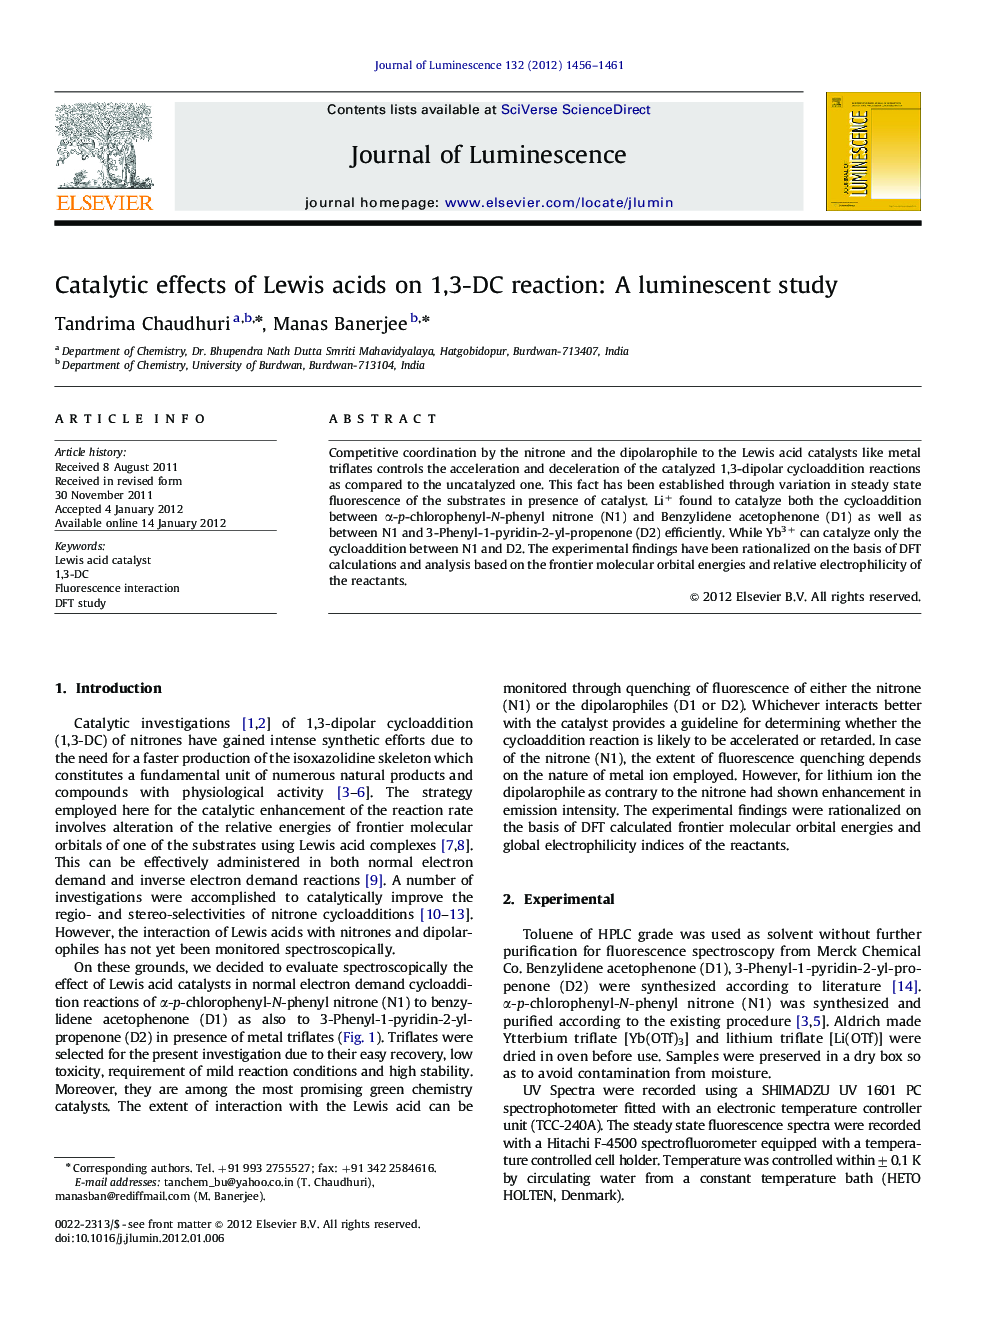 Catalytic effects of Lewis acids on 1,3-DC reaction: A luminescent study